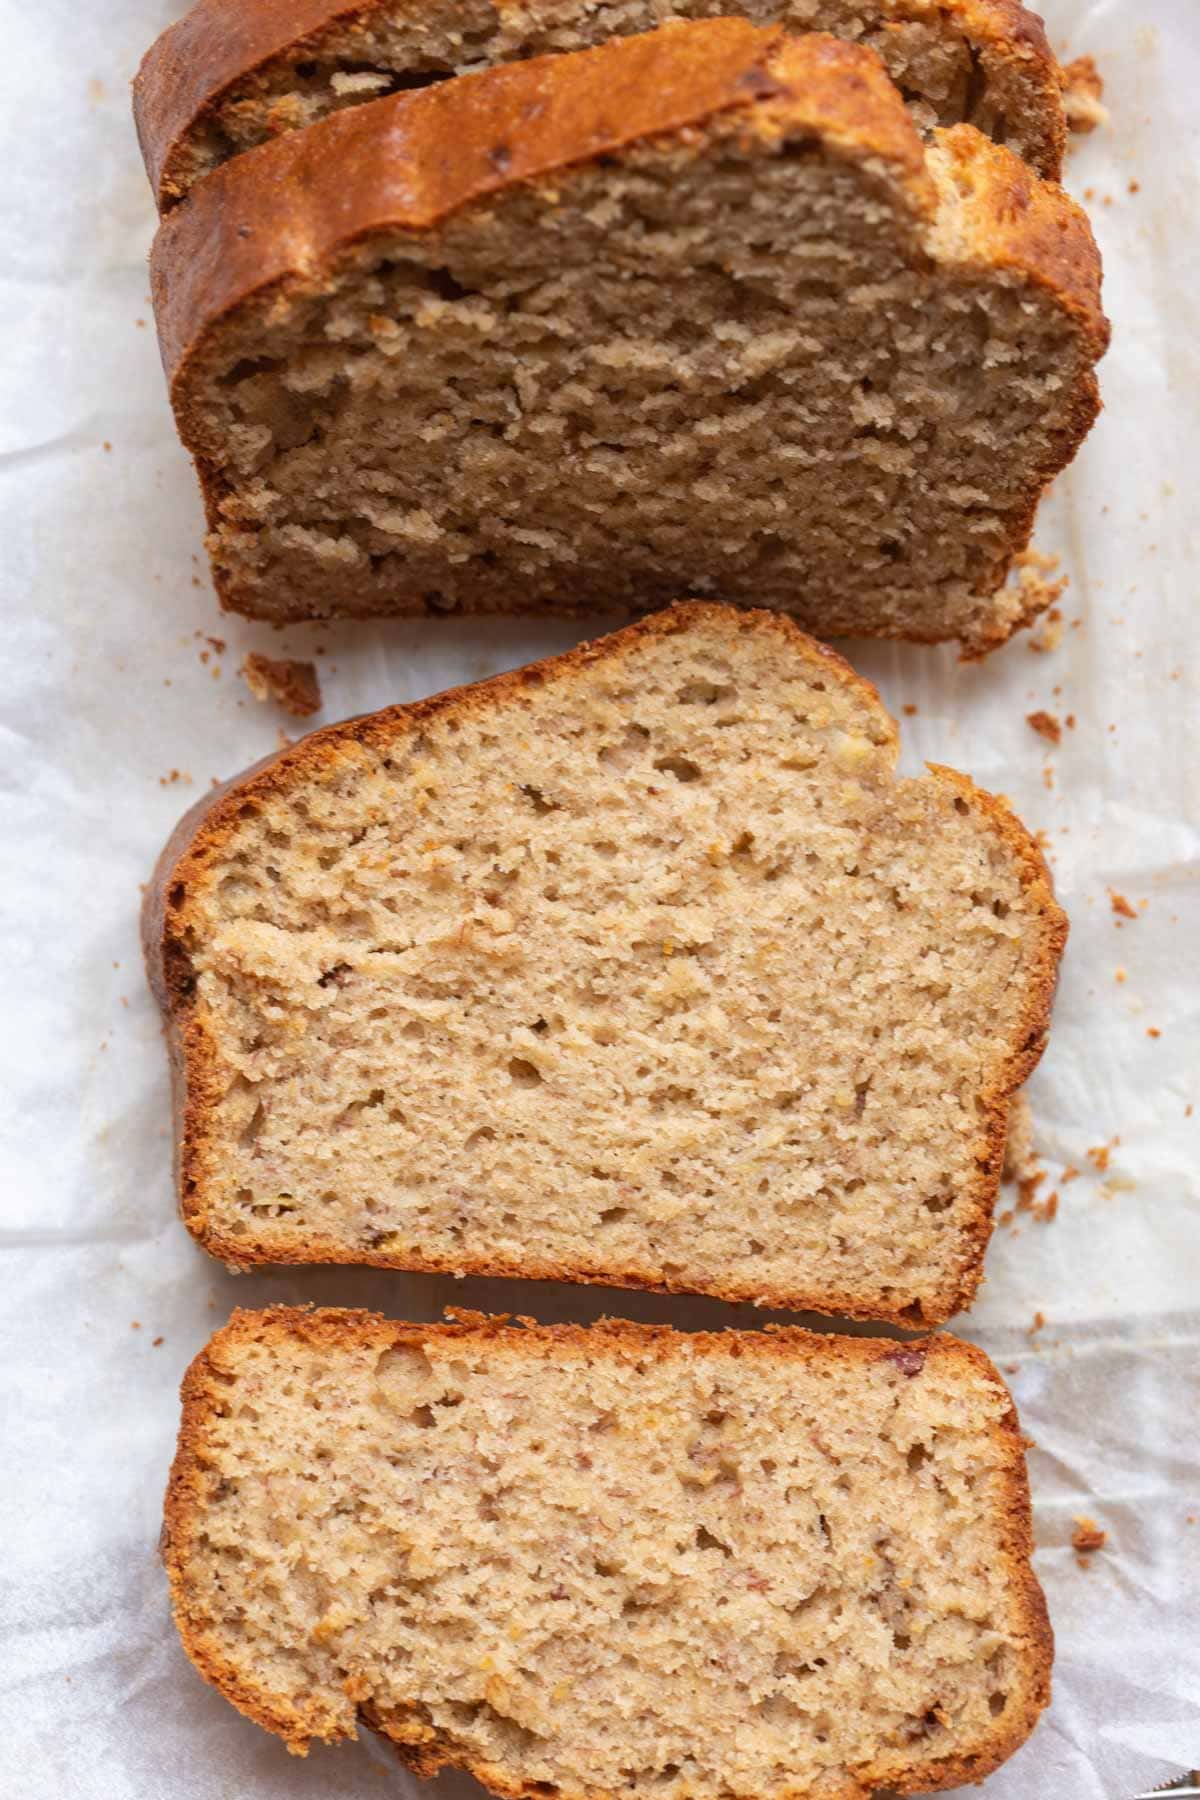 How to make 4 ingredient banana bread.